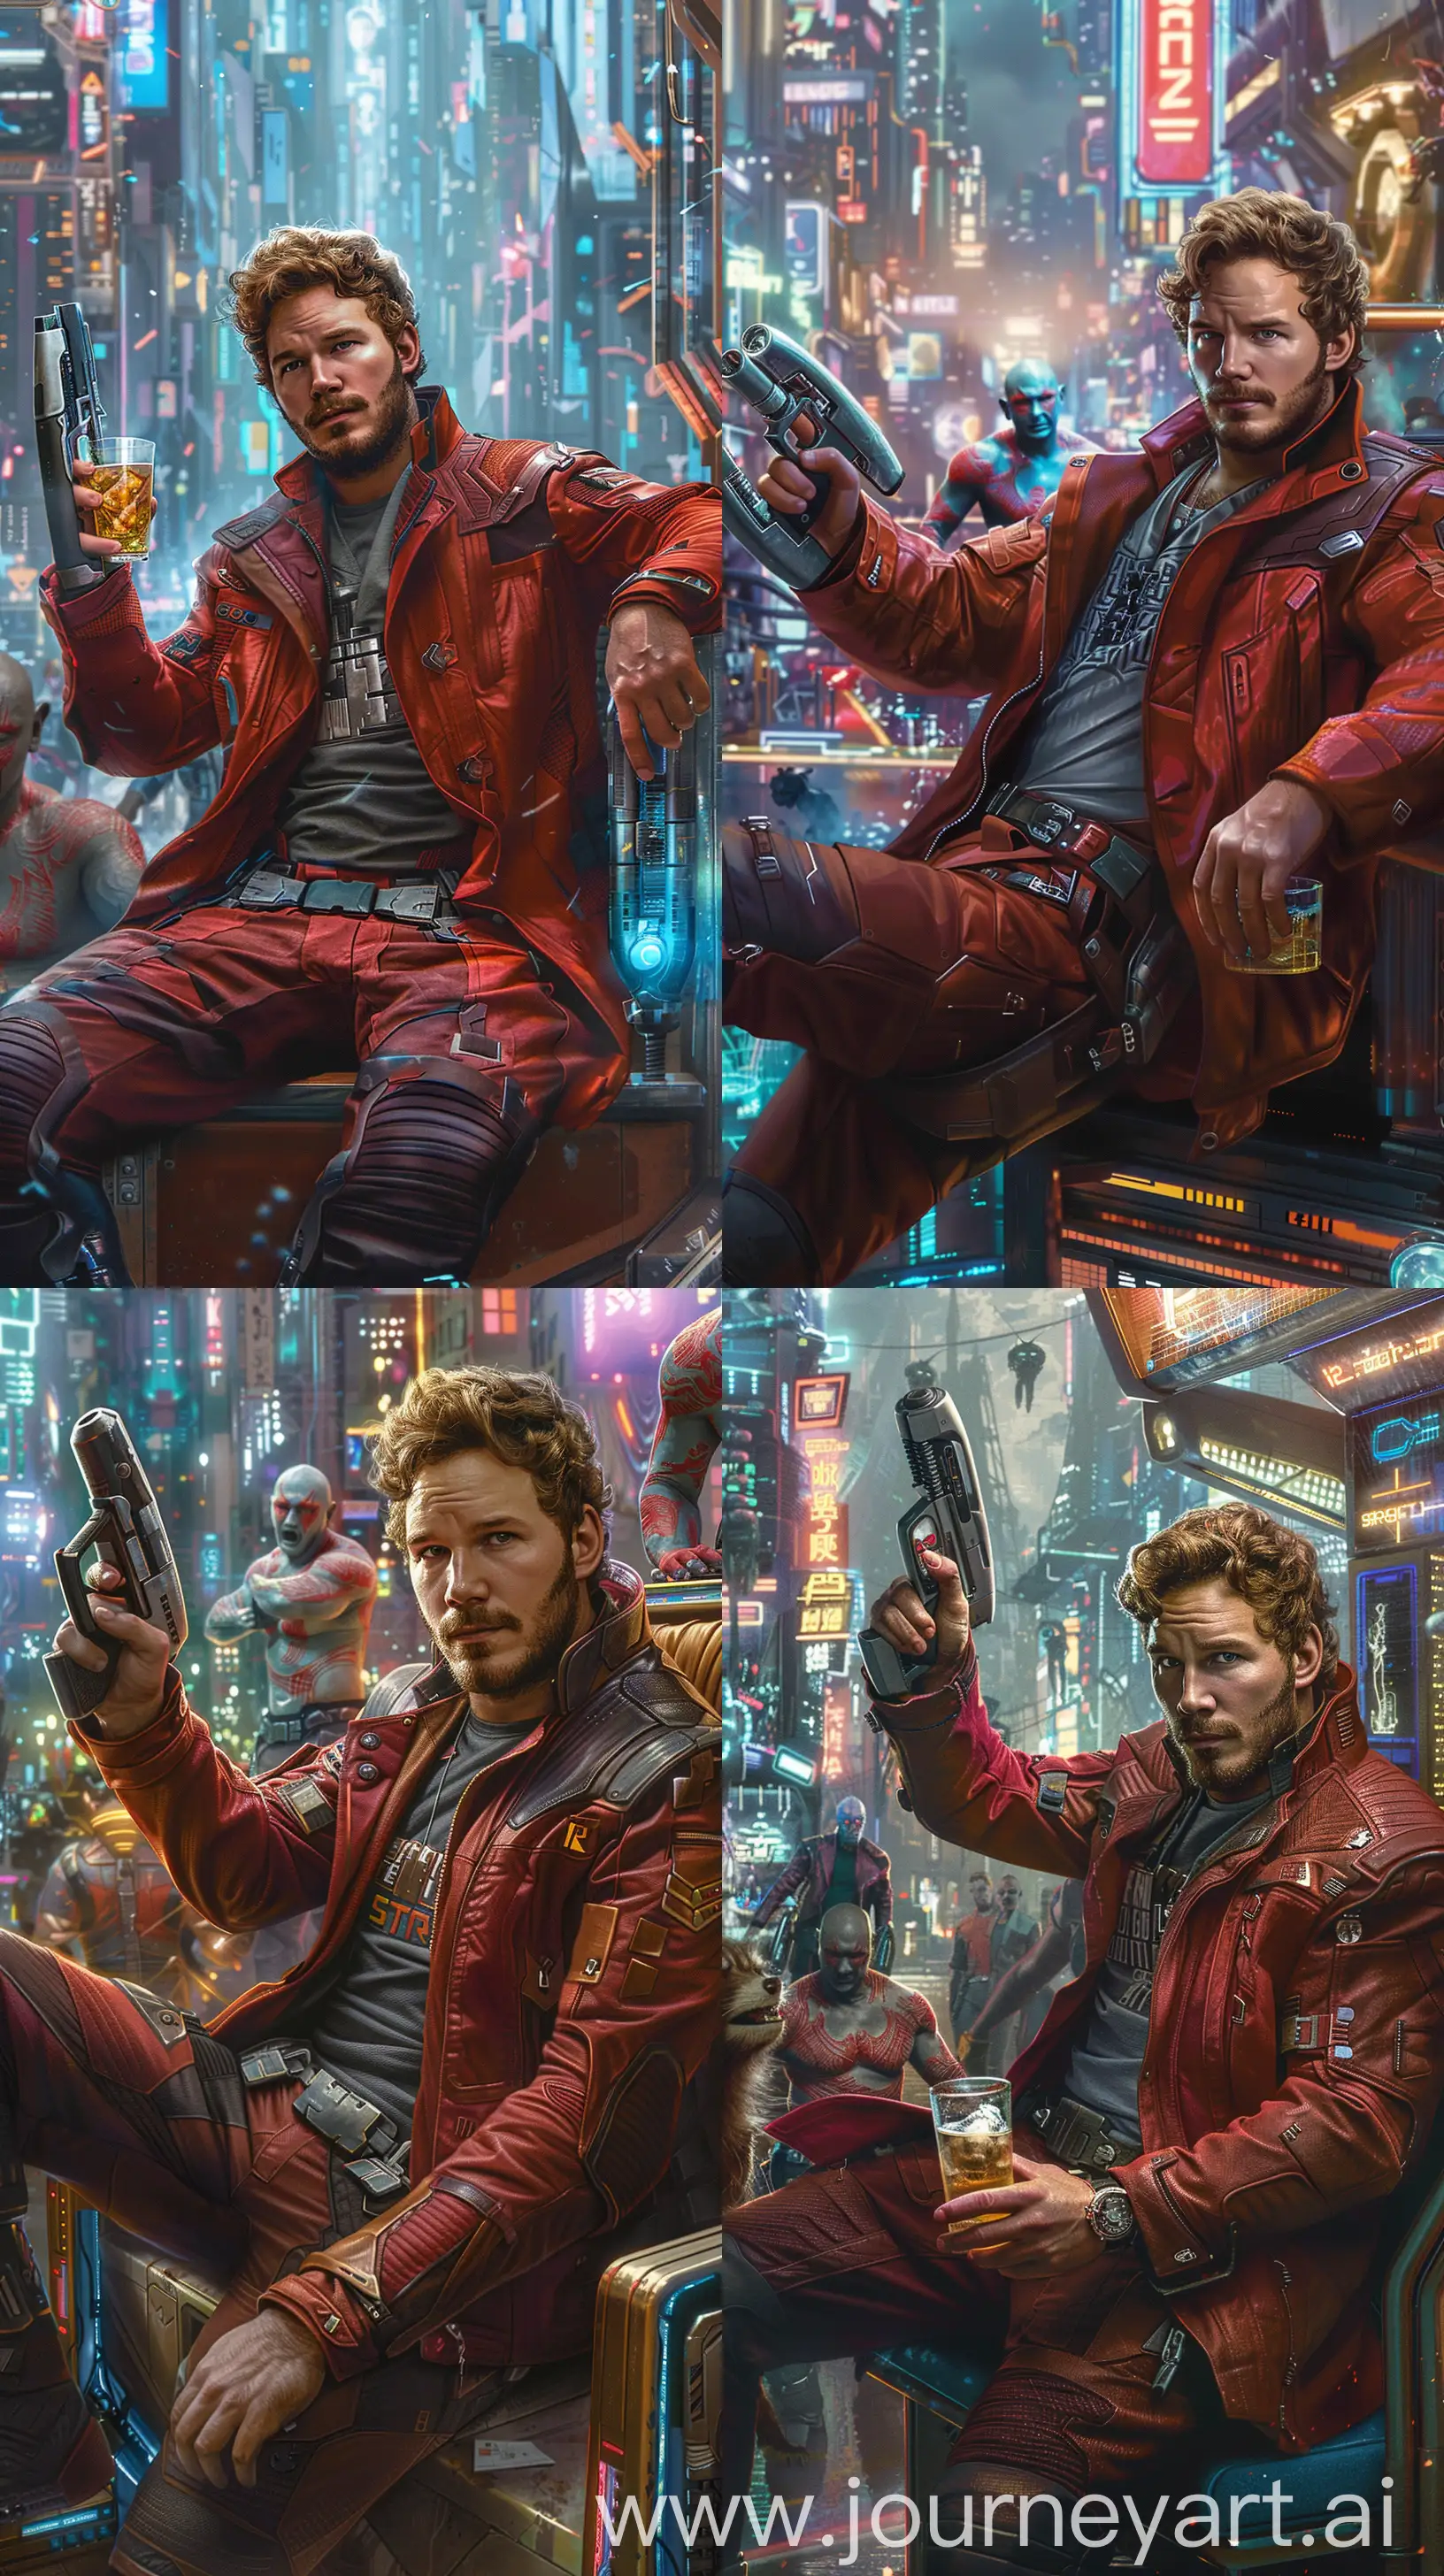 In the image, Star-Lord, a man with brown hair and a beard, is holding a blaster while sitting on a booth in a cyberpunk city. He wears a red jacket and holds a drink in his hand. The background features a cityscape with neon lights and his team --ar 9:16 --s 250